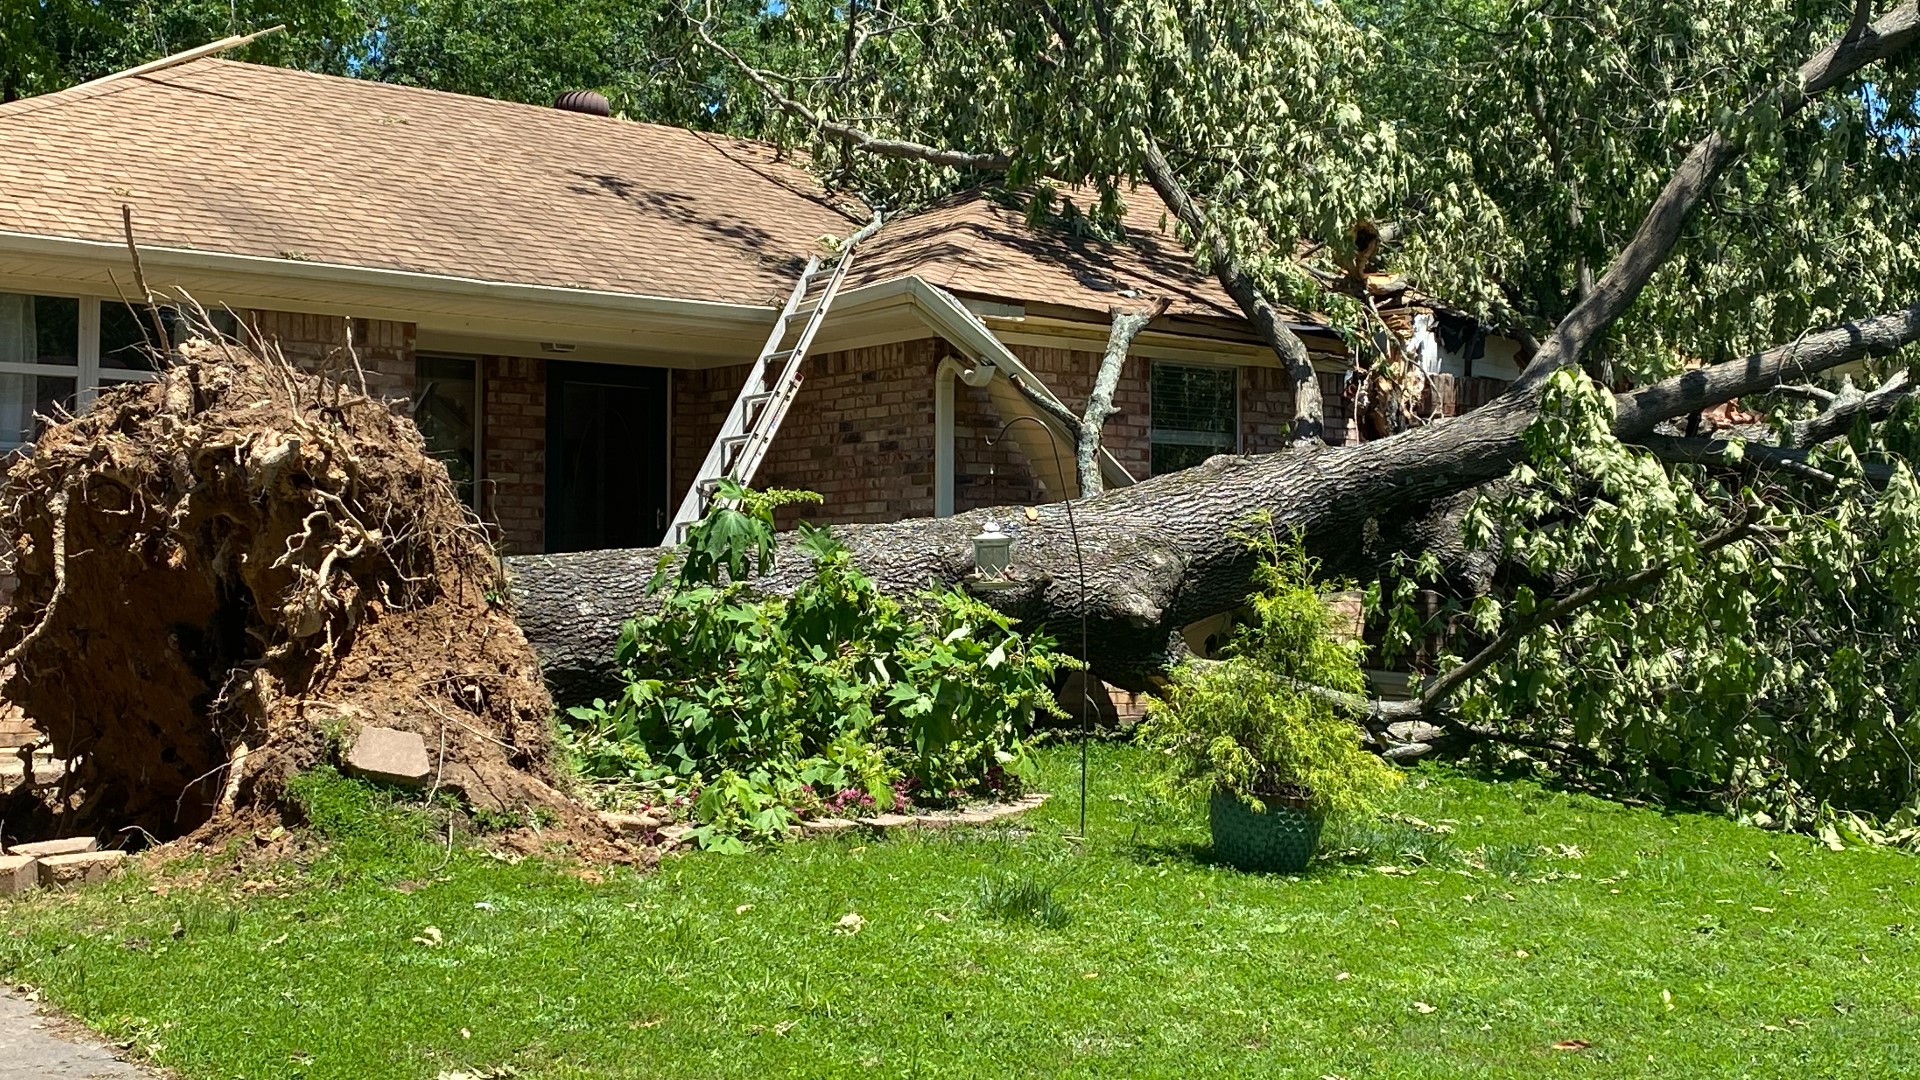 People living in Alma spent another day cleaning up from Monday night’s devastating storms.